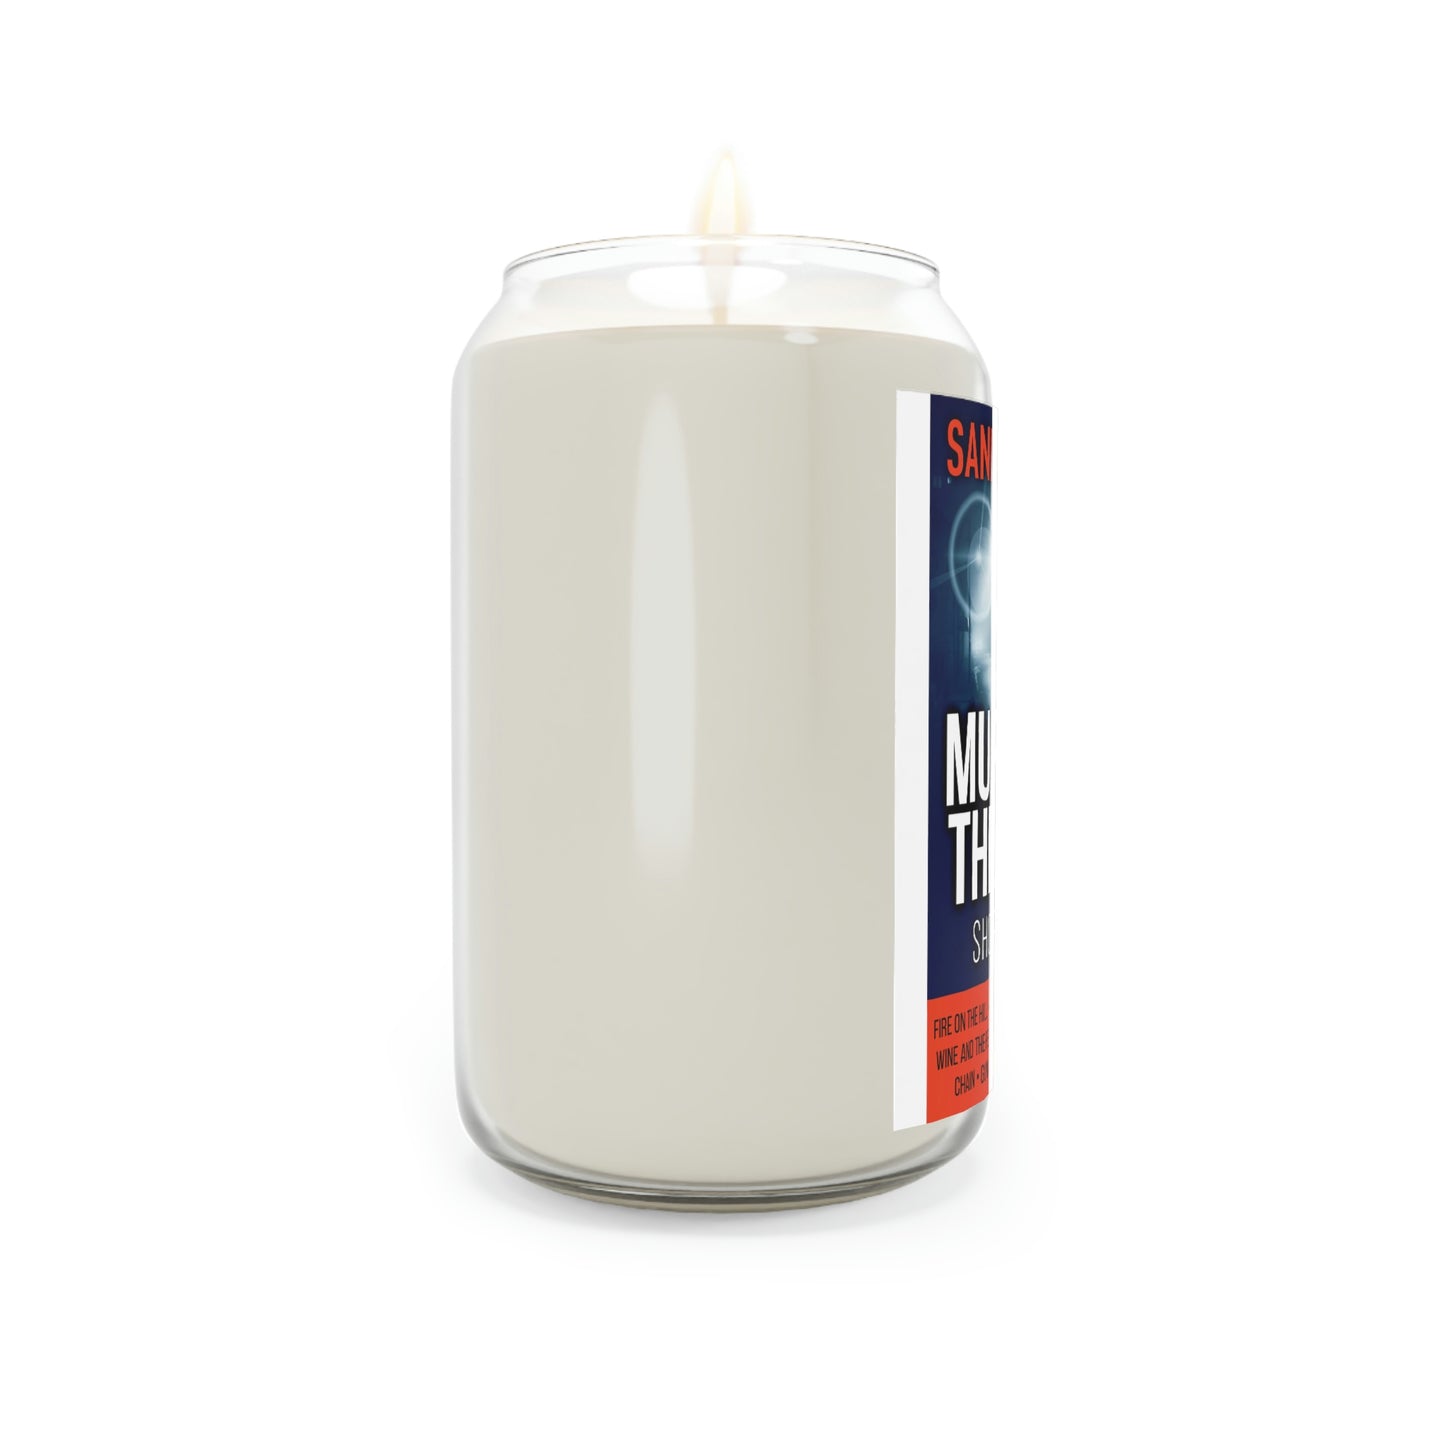 Murder In The Midst - Scented Candle